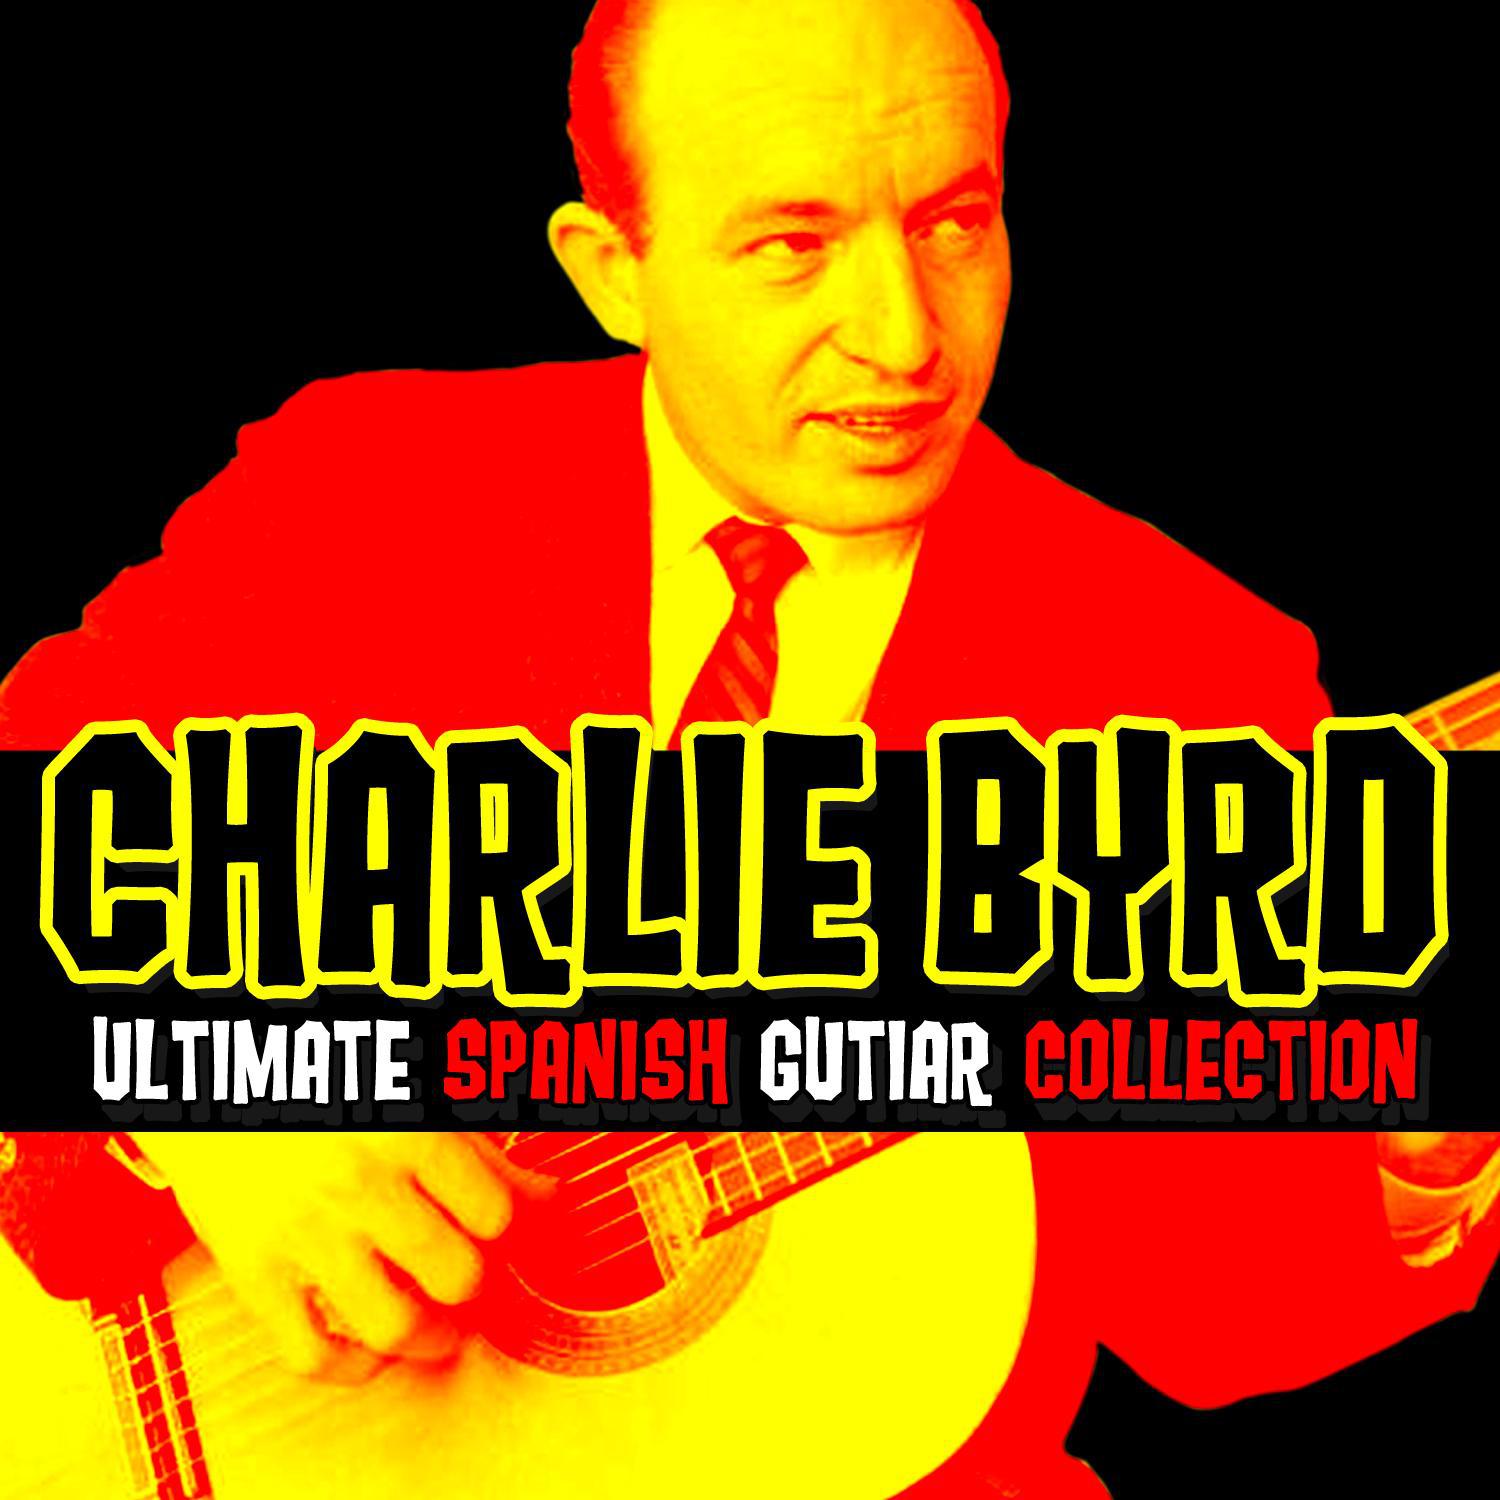 Ultimate Spanish Guitar Collection (1957-1962)